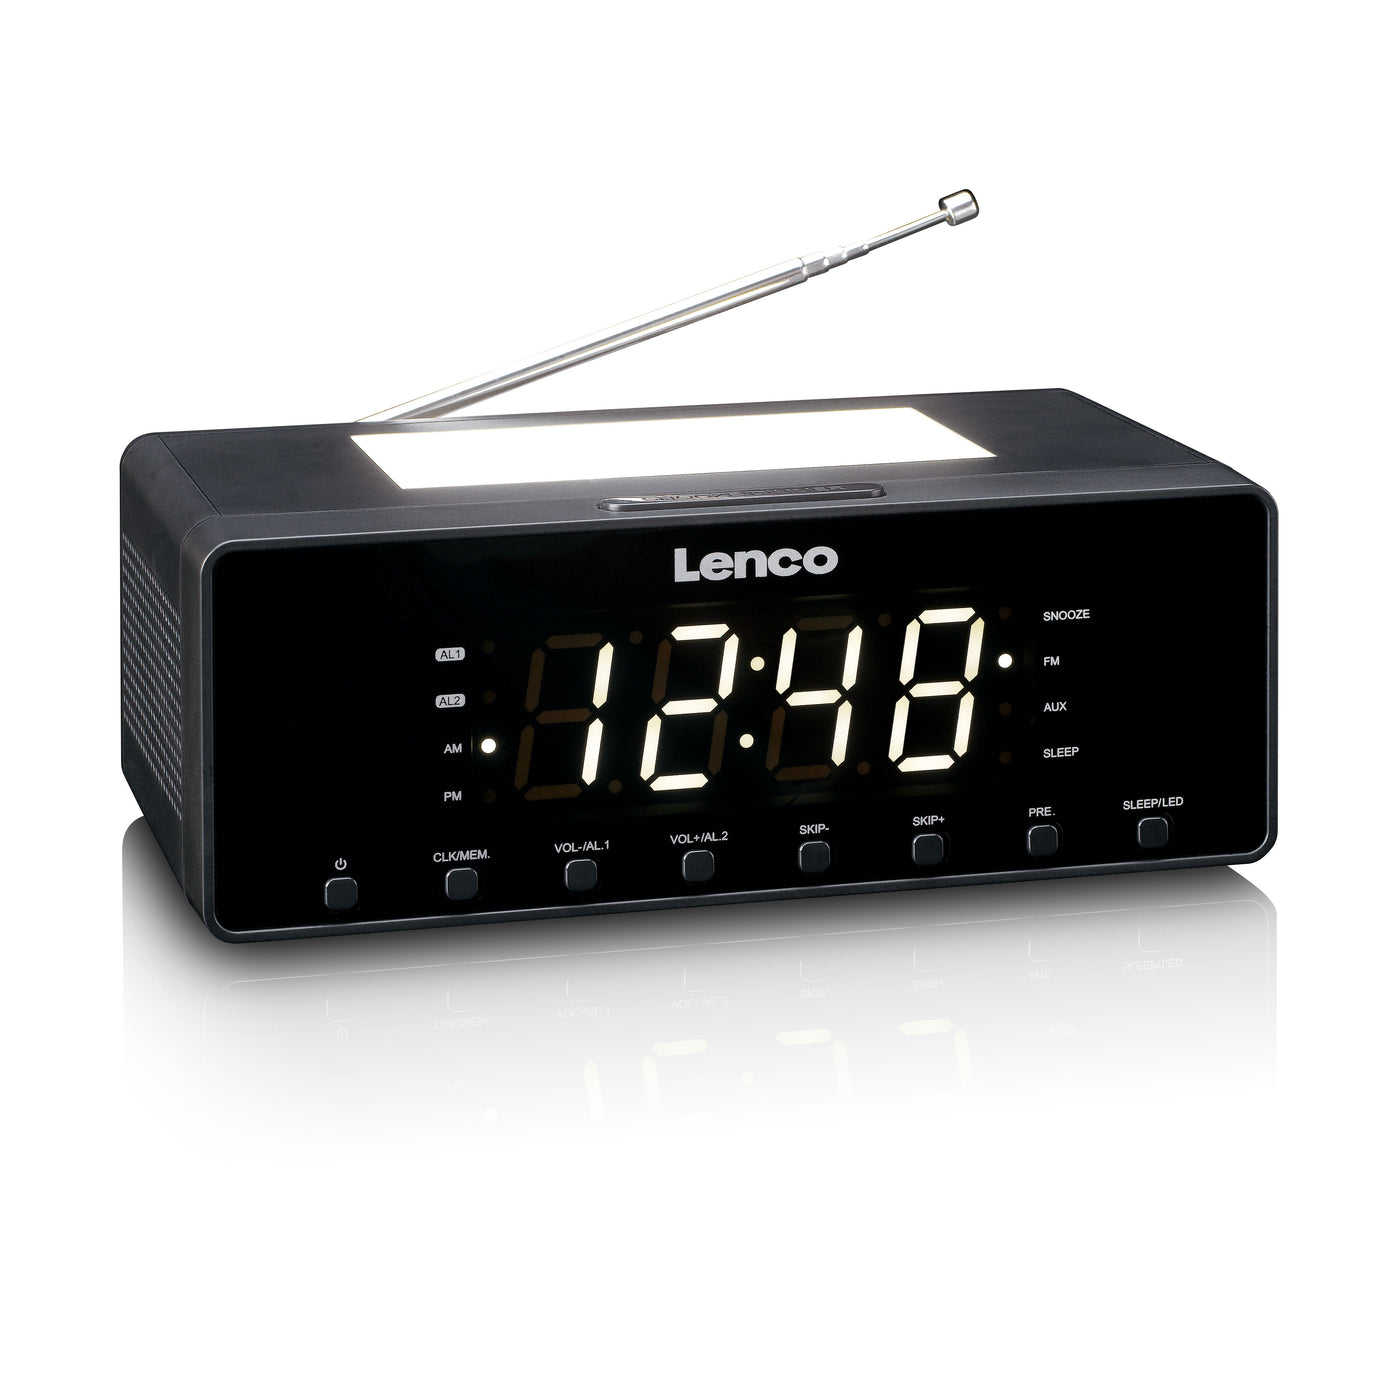 LENCO CR-540BK - Clock radio with dimmable night light and USB charging function - Black